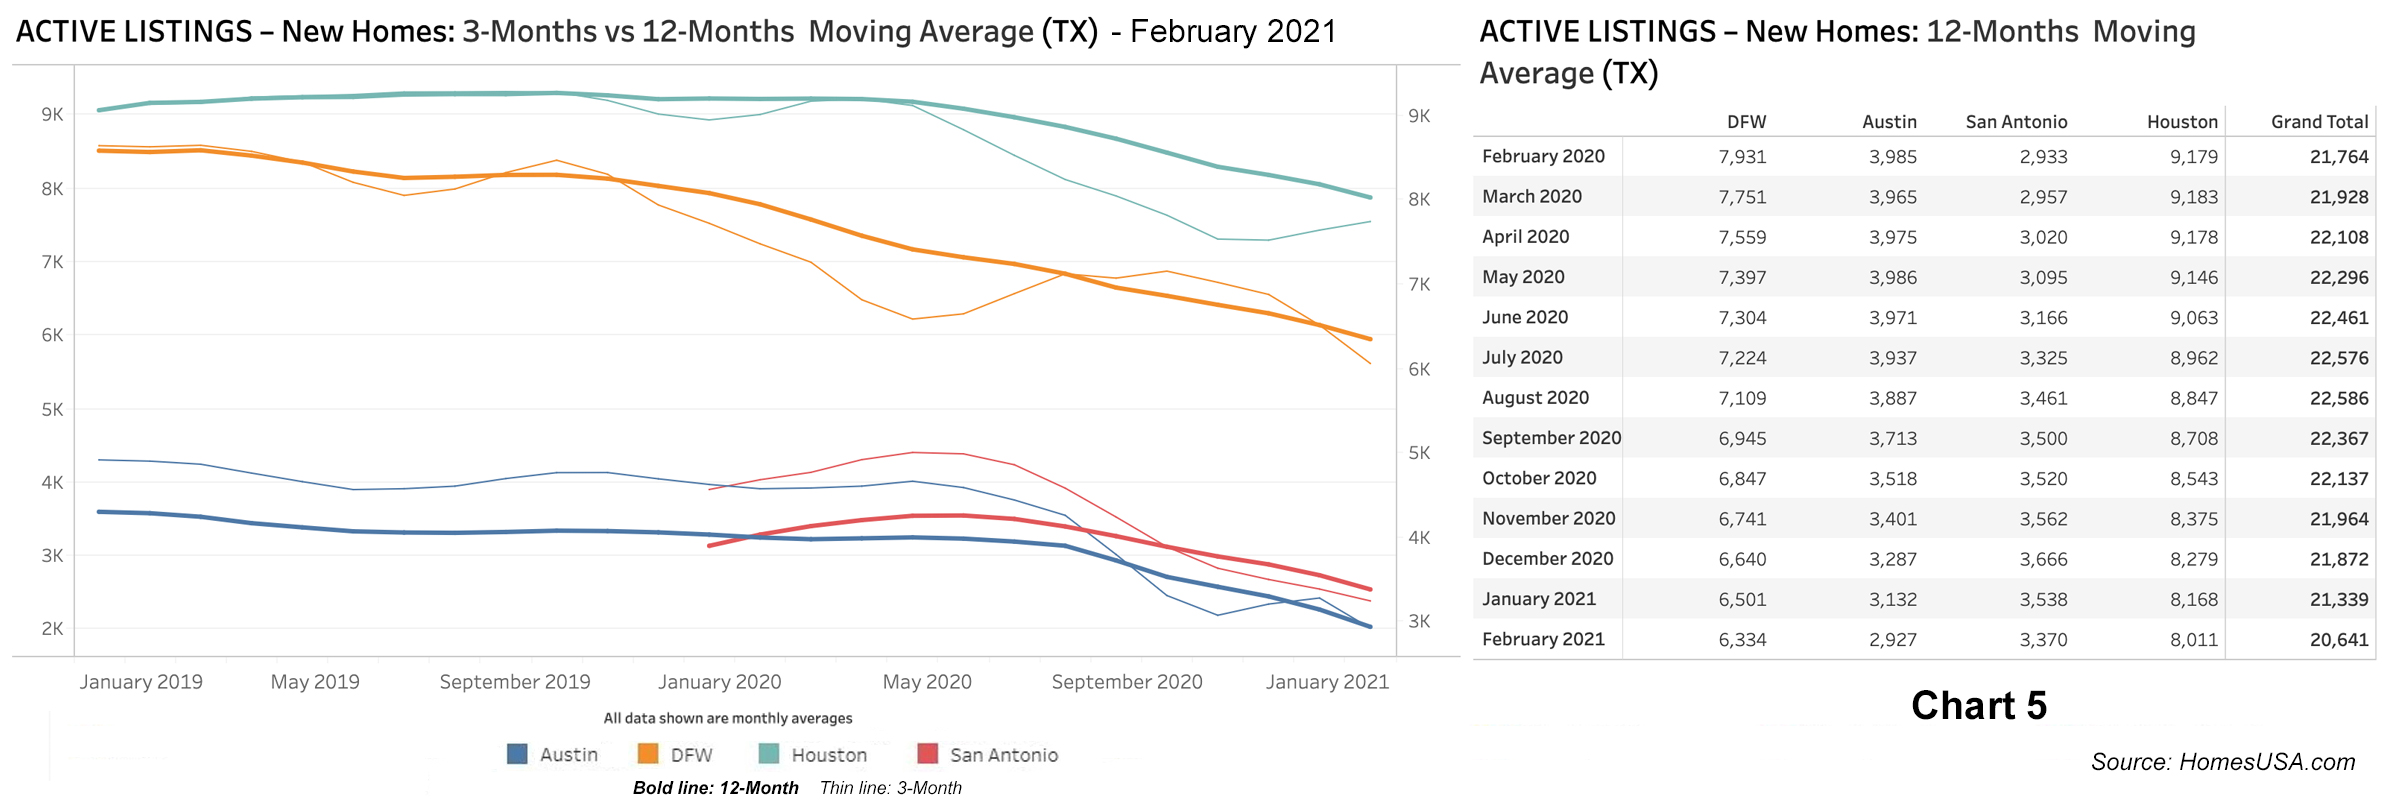 Chart 6: Active Listings for New Home Sales - February 2021